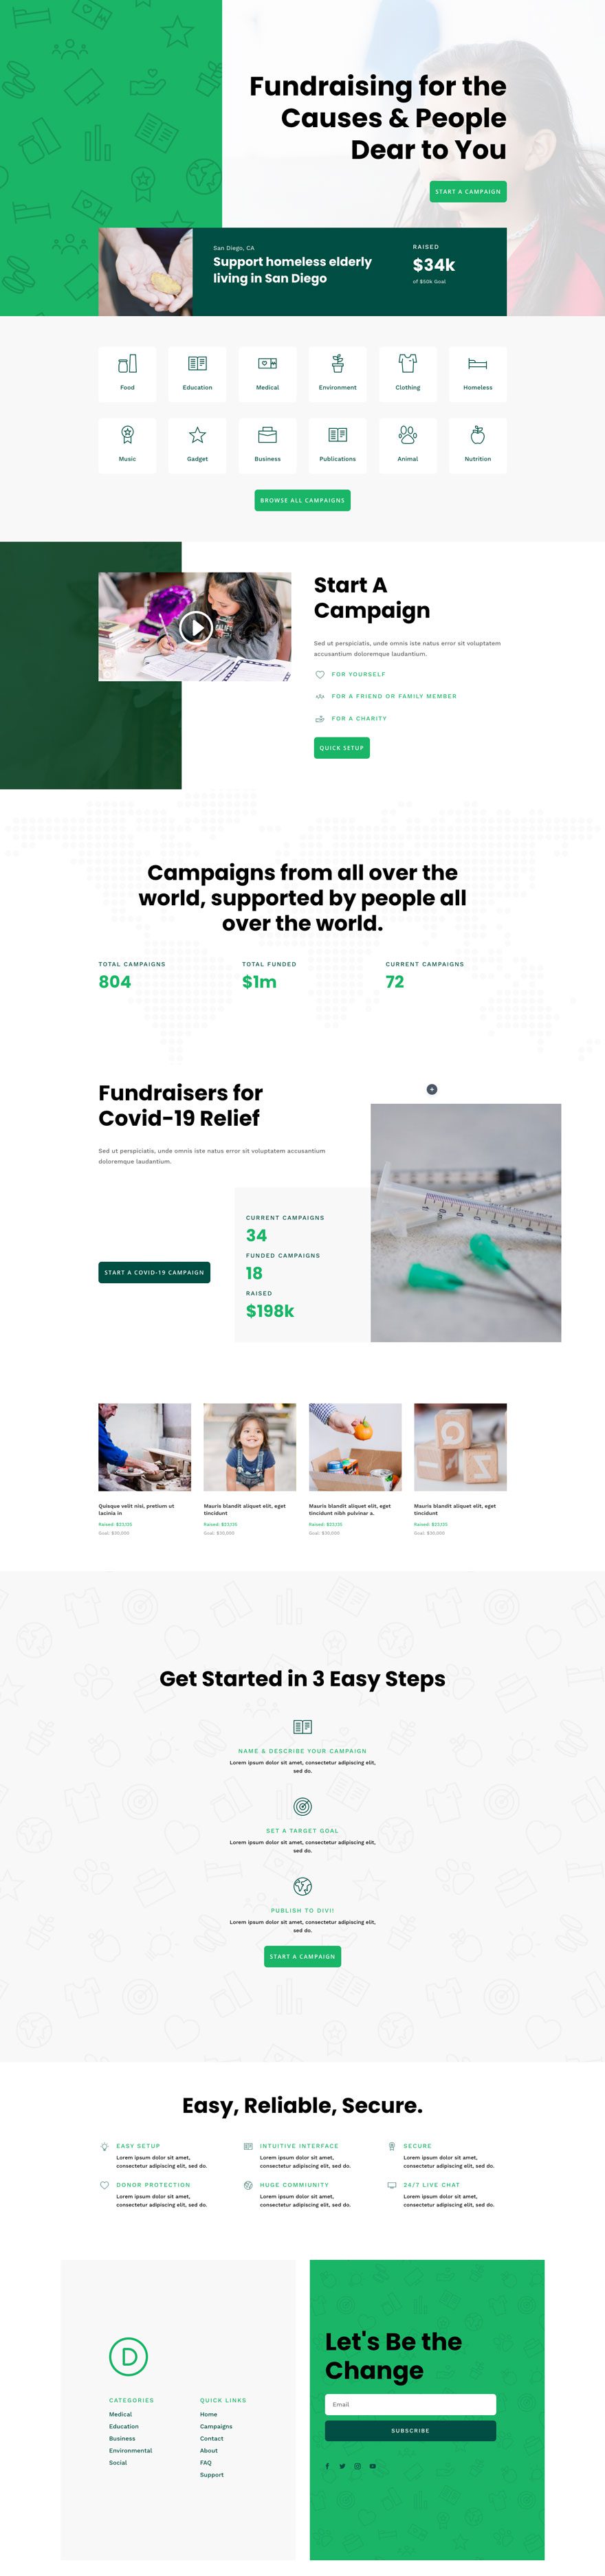 divi crowdfunding layout pack